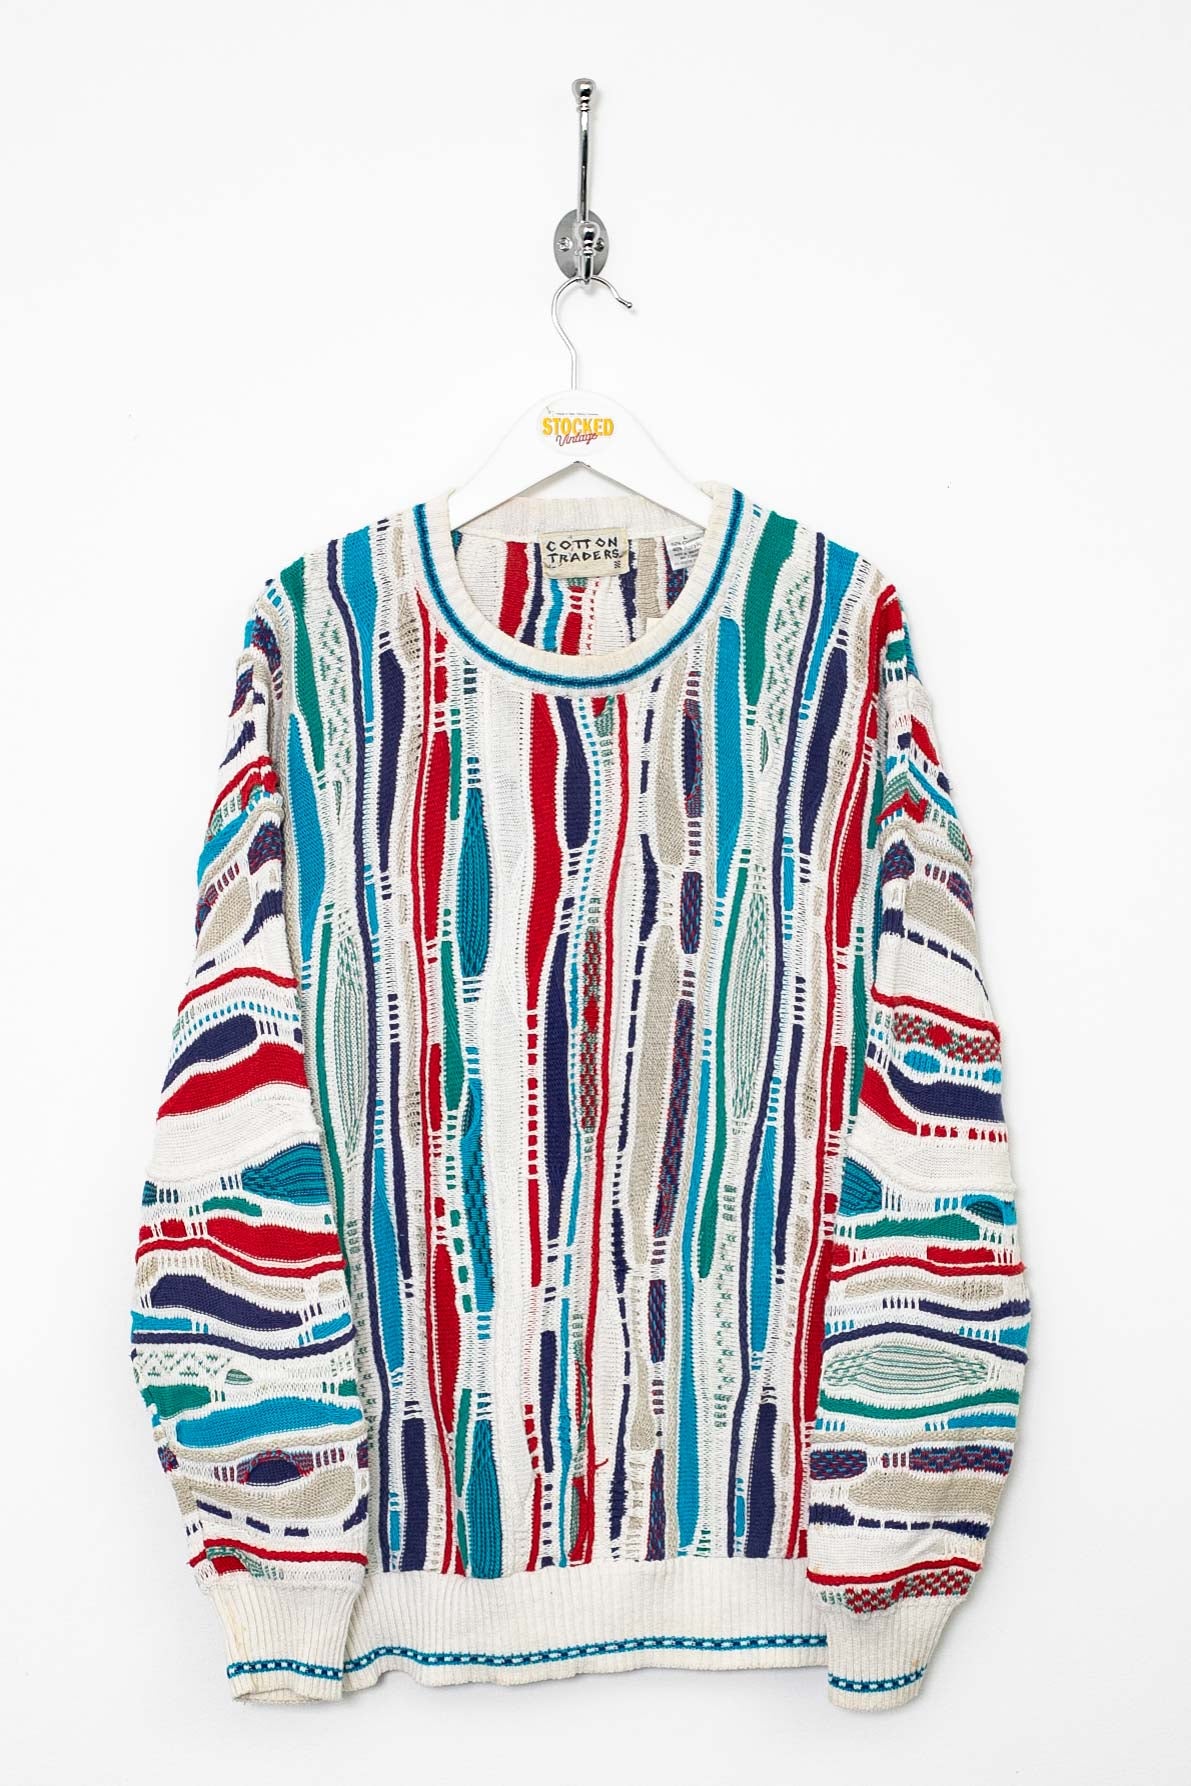 00s Cotton Traders Coogi Style Knit Jumper (L)